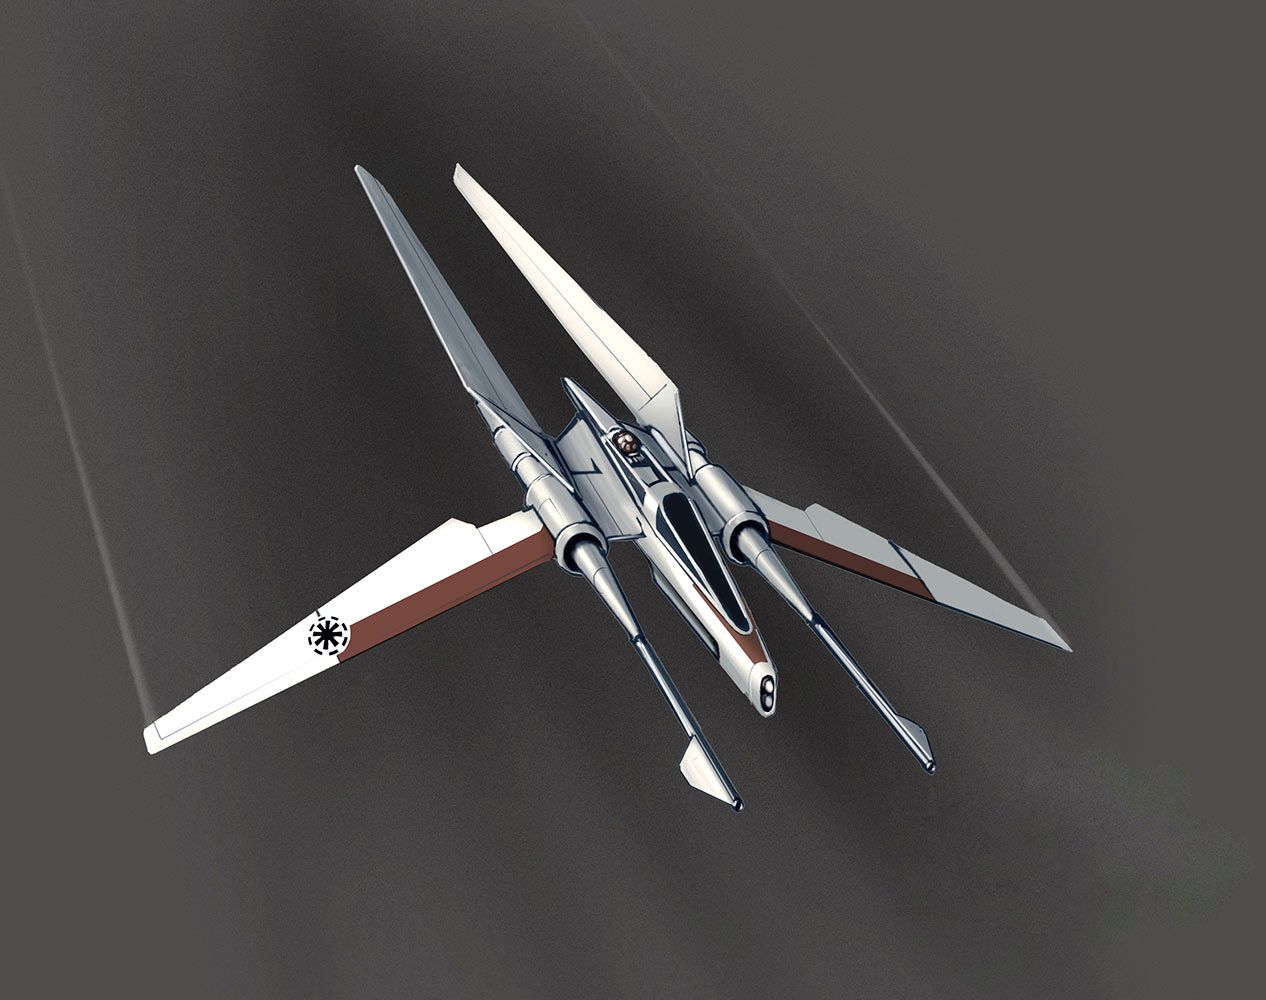 Star Wars The High Republic Ships and Vehicles image #7